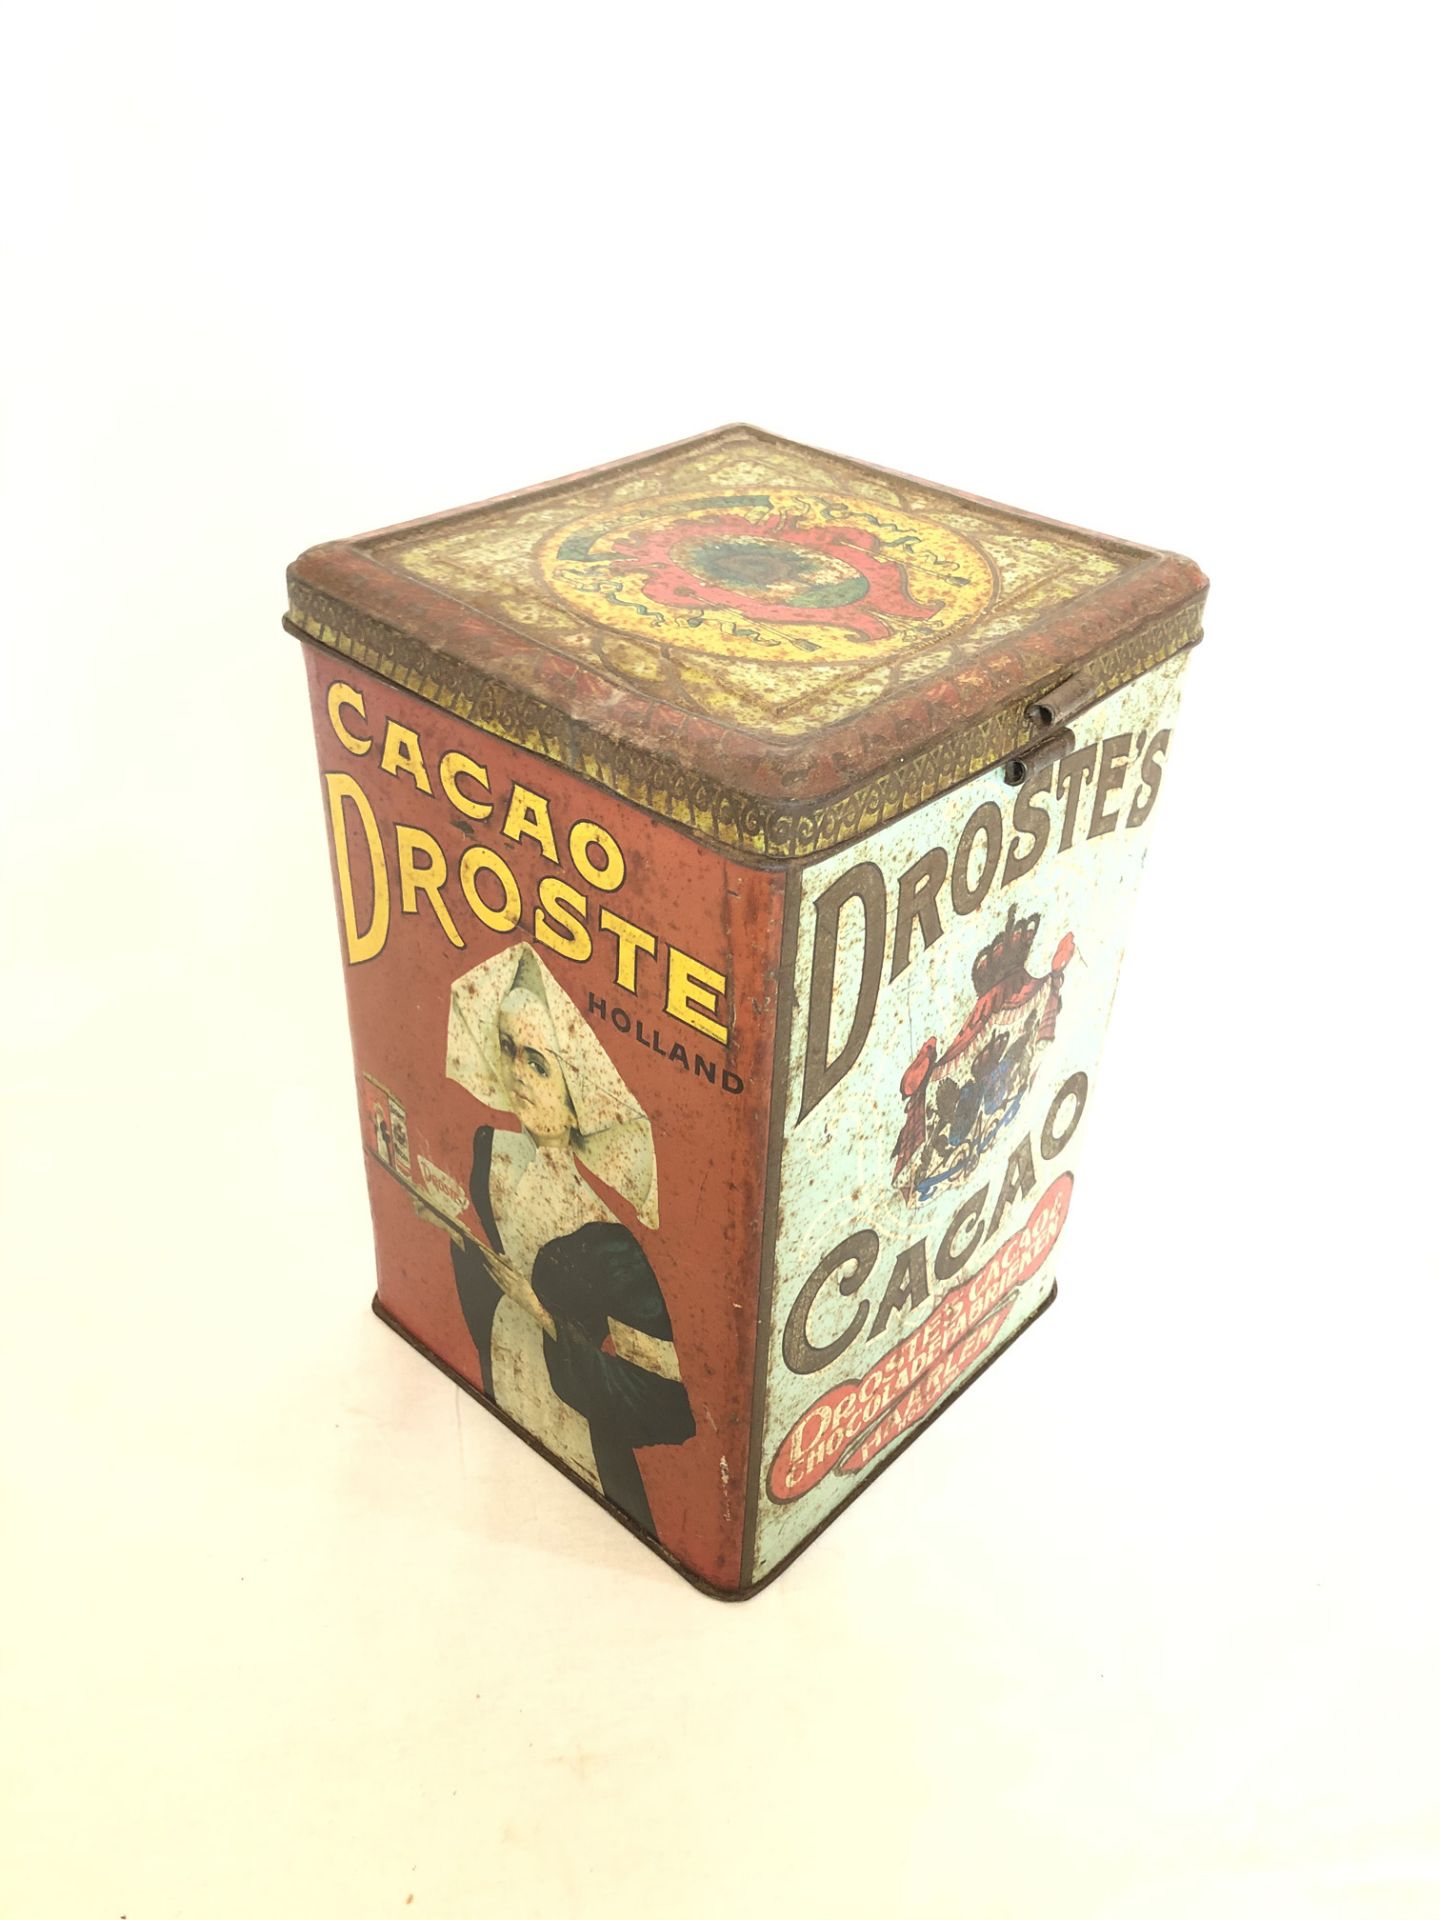 Tin Box Droste's Cacao Holland - Image 2 of 4